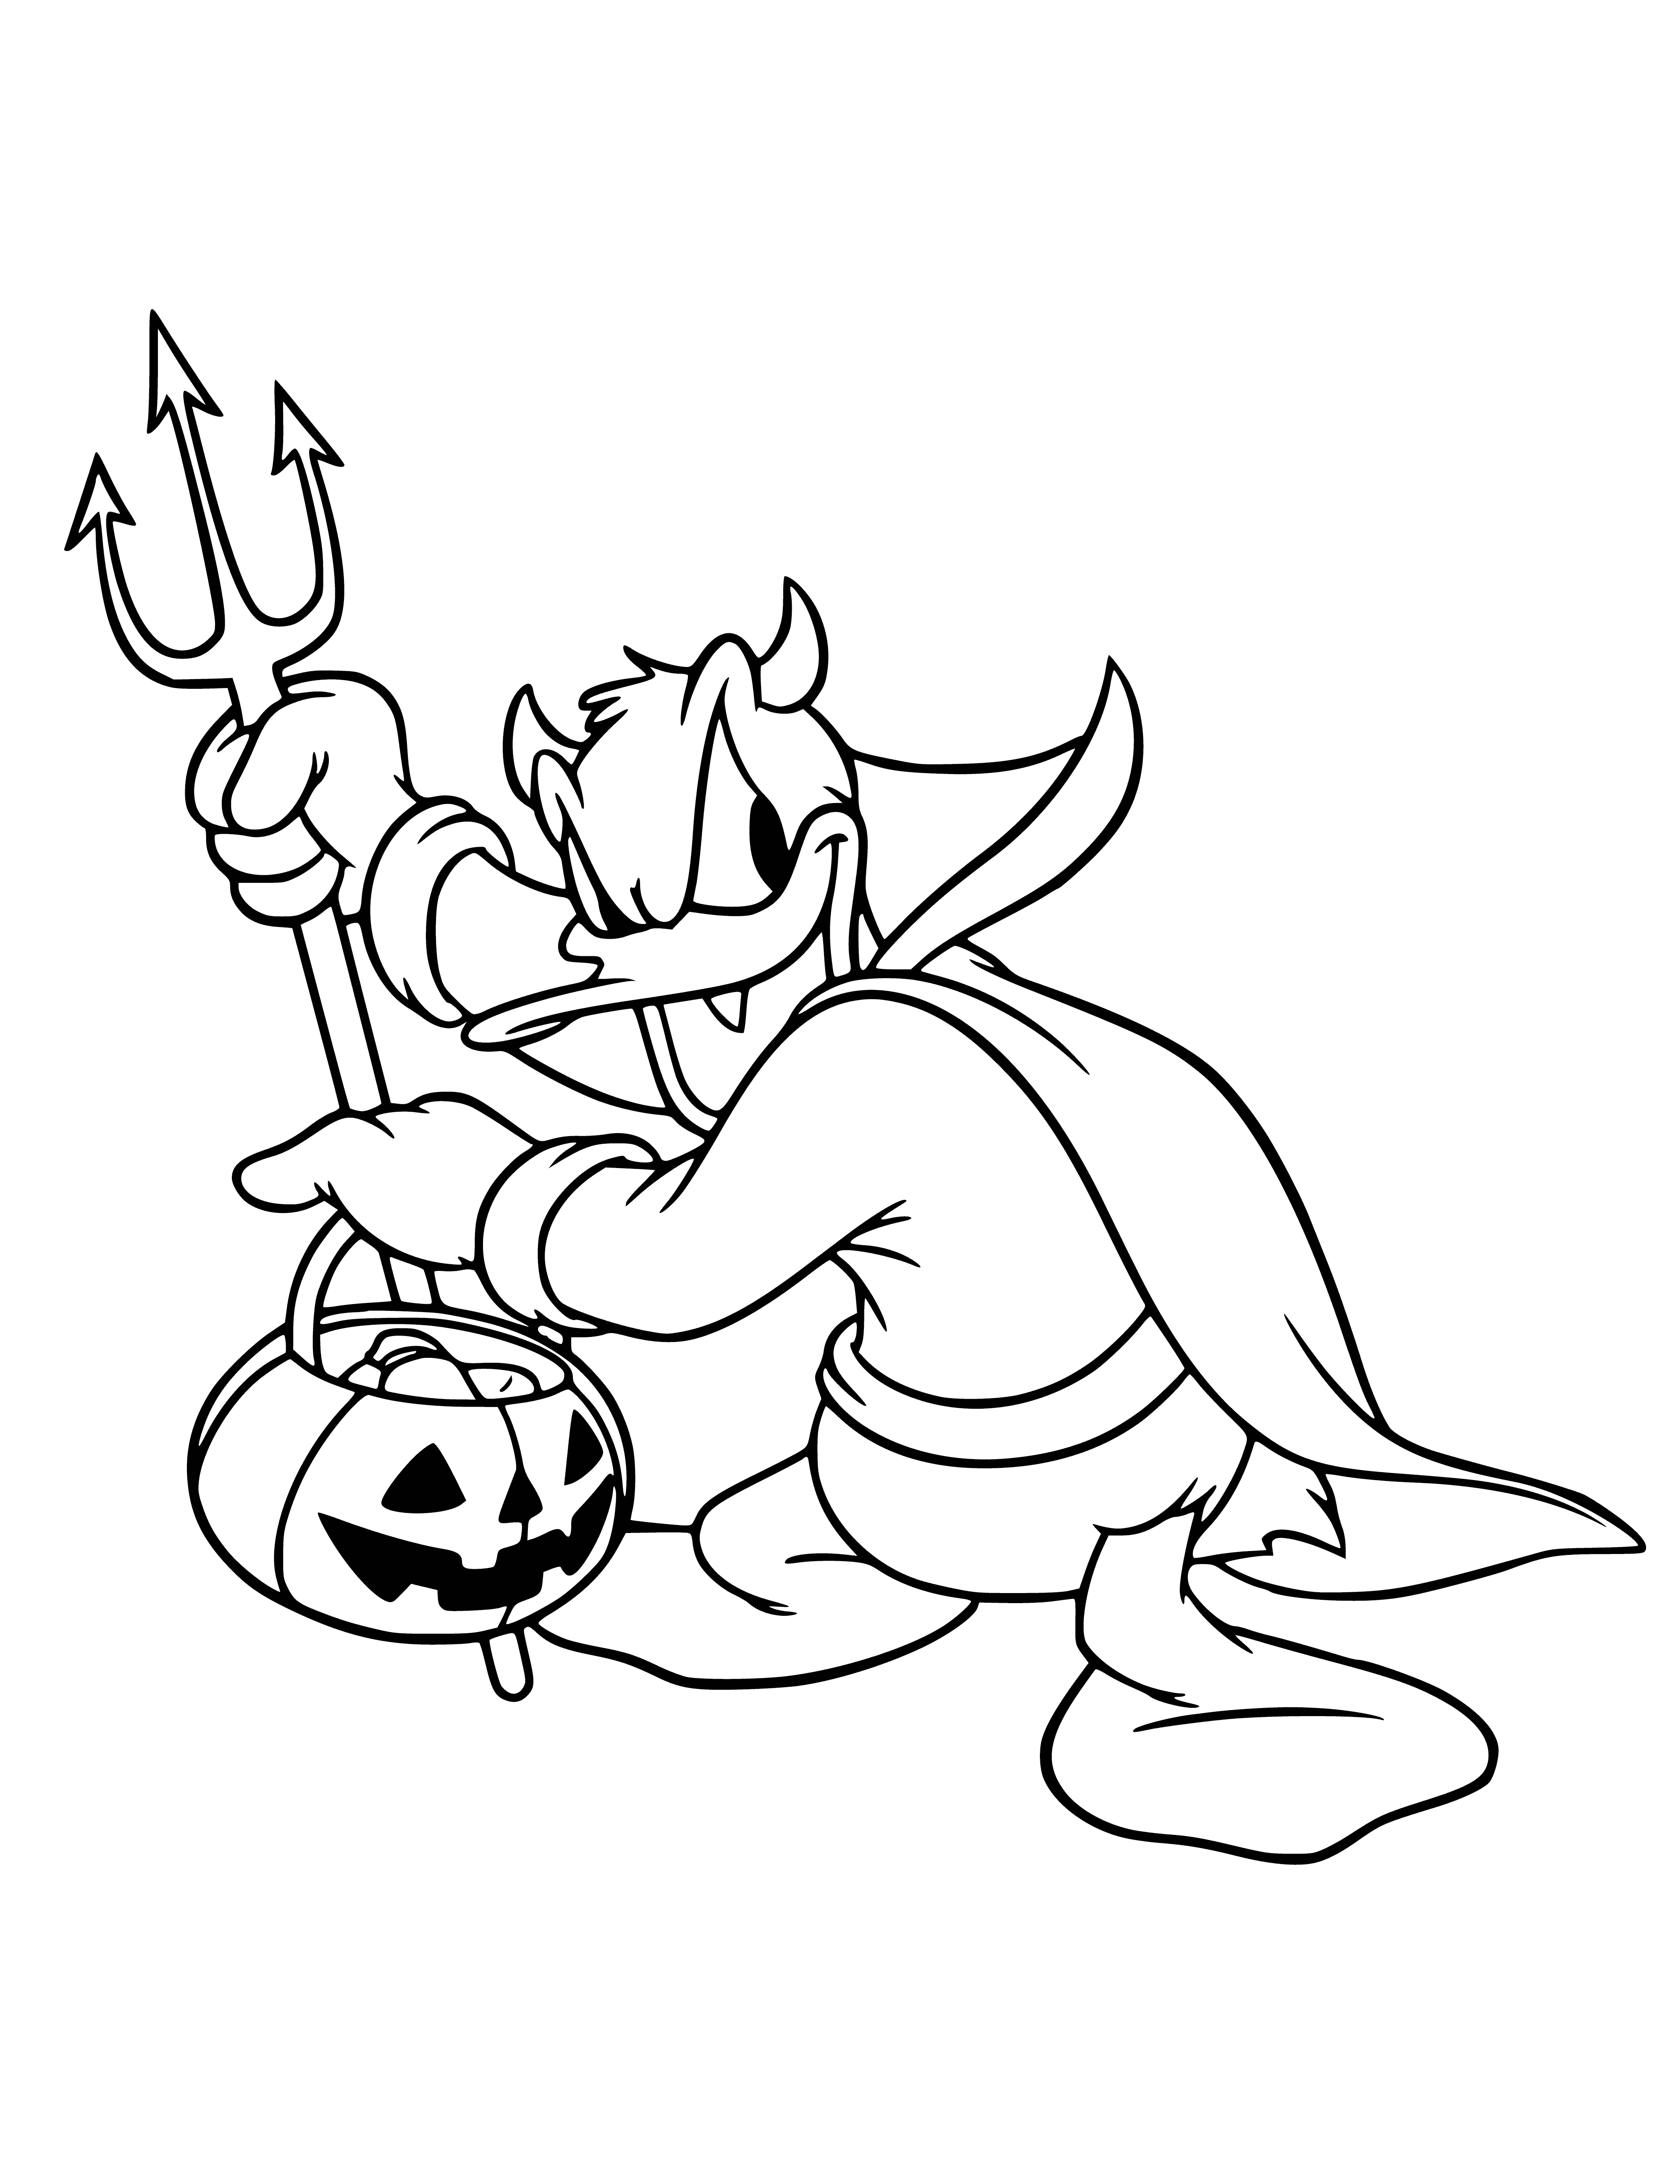 coloring page: Donald Duck is dressed as a pirate for Halloween, complete with black hat, red bandana, and denim jacket - candy filled bag in tow.